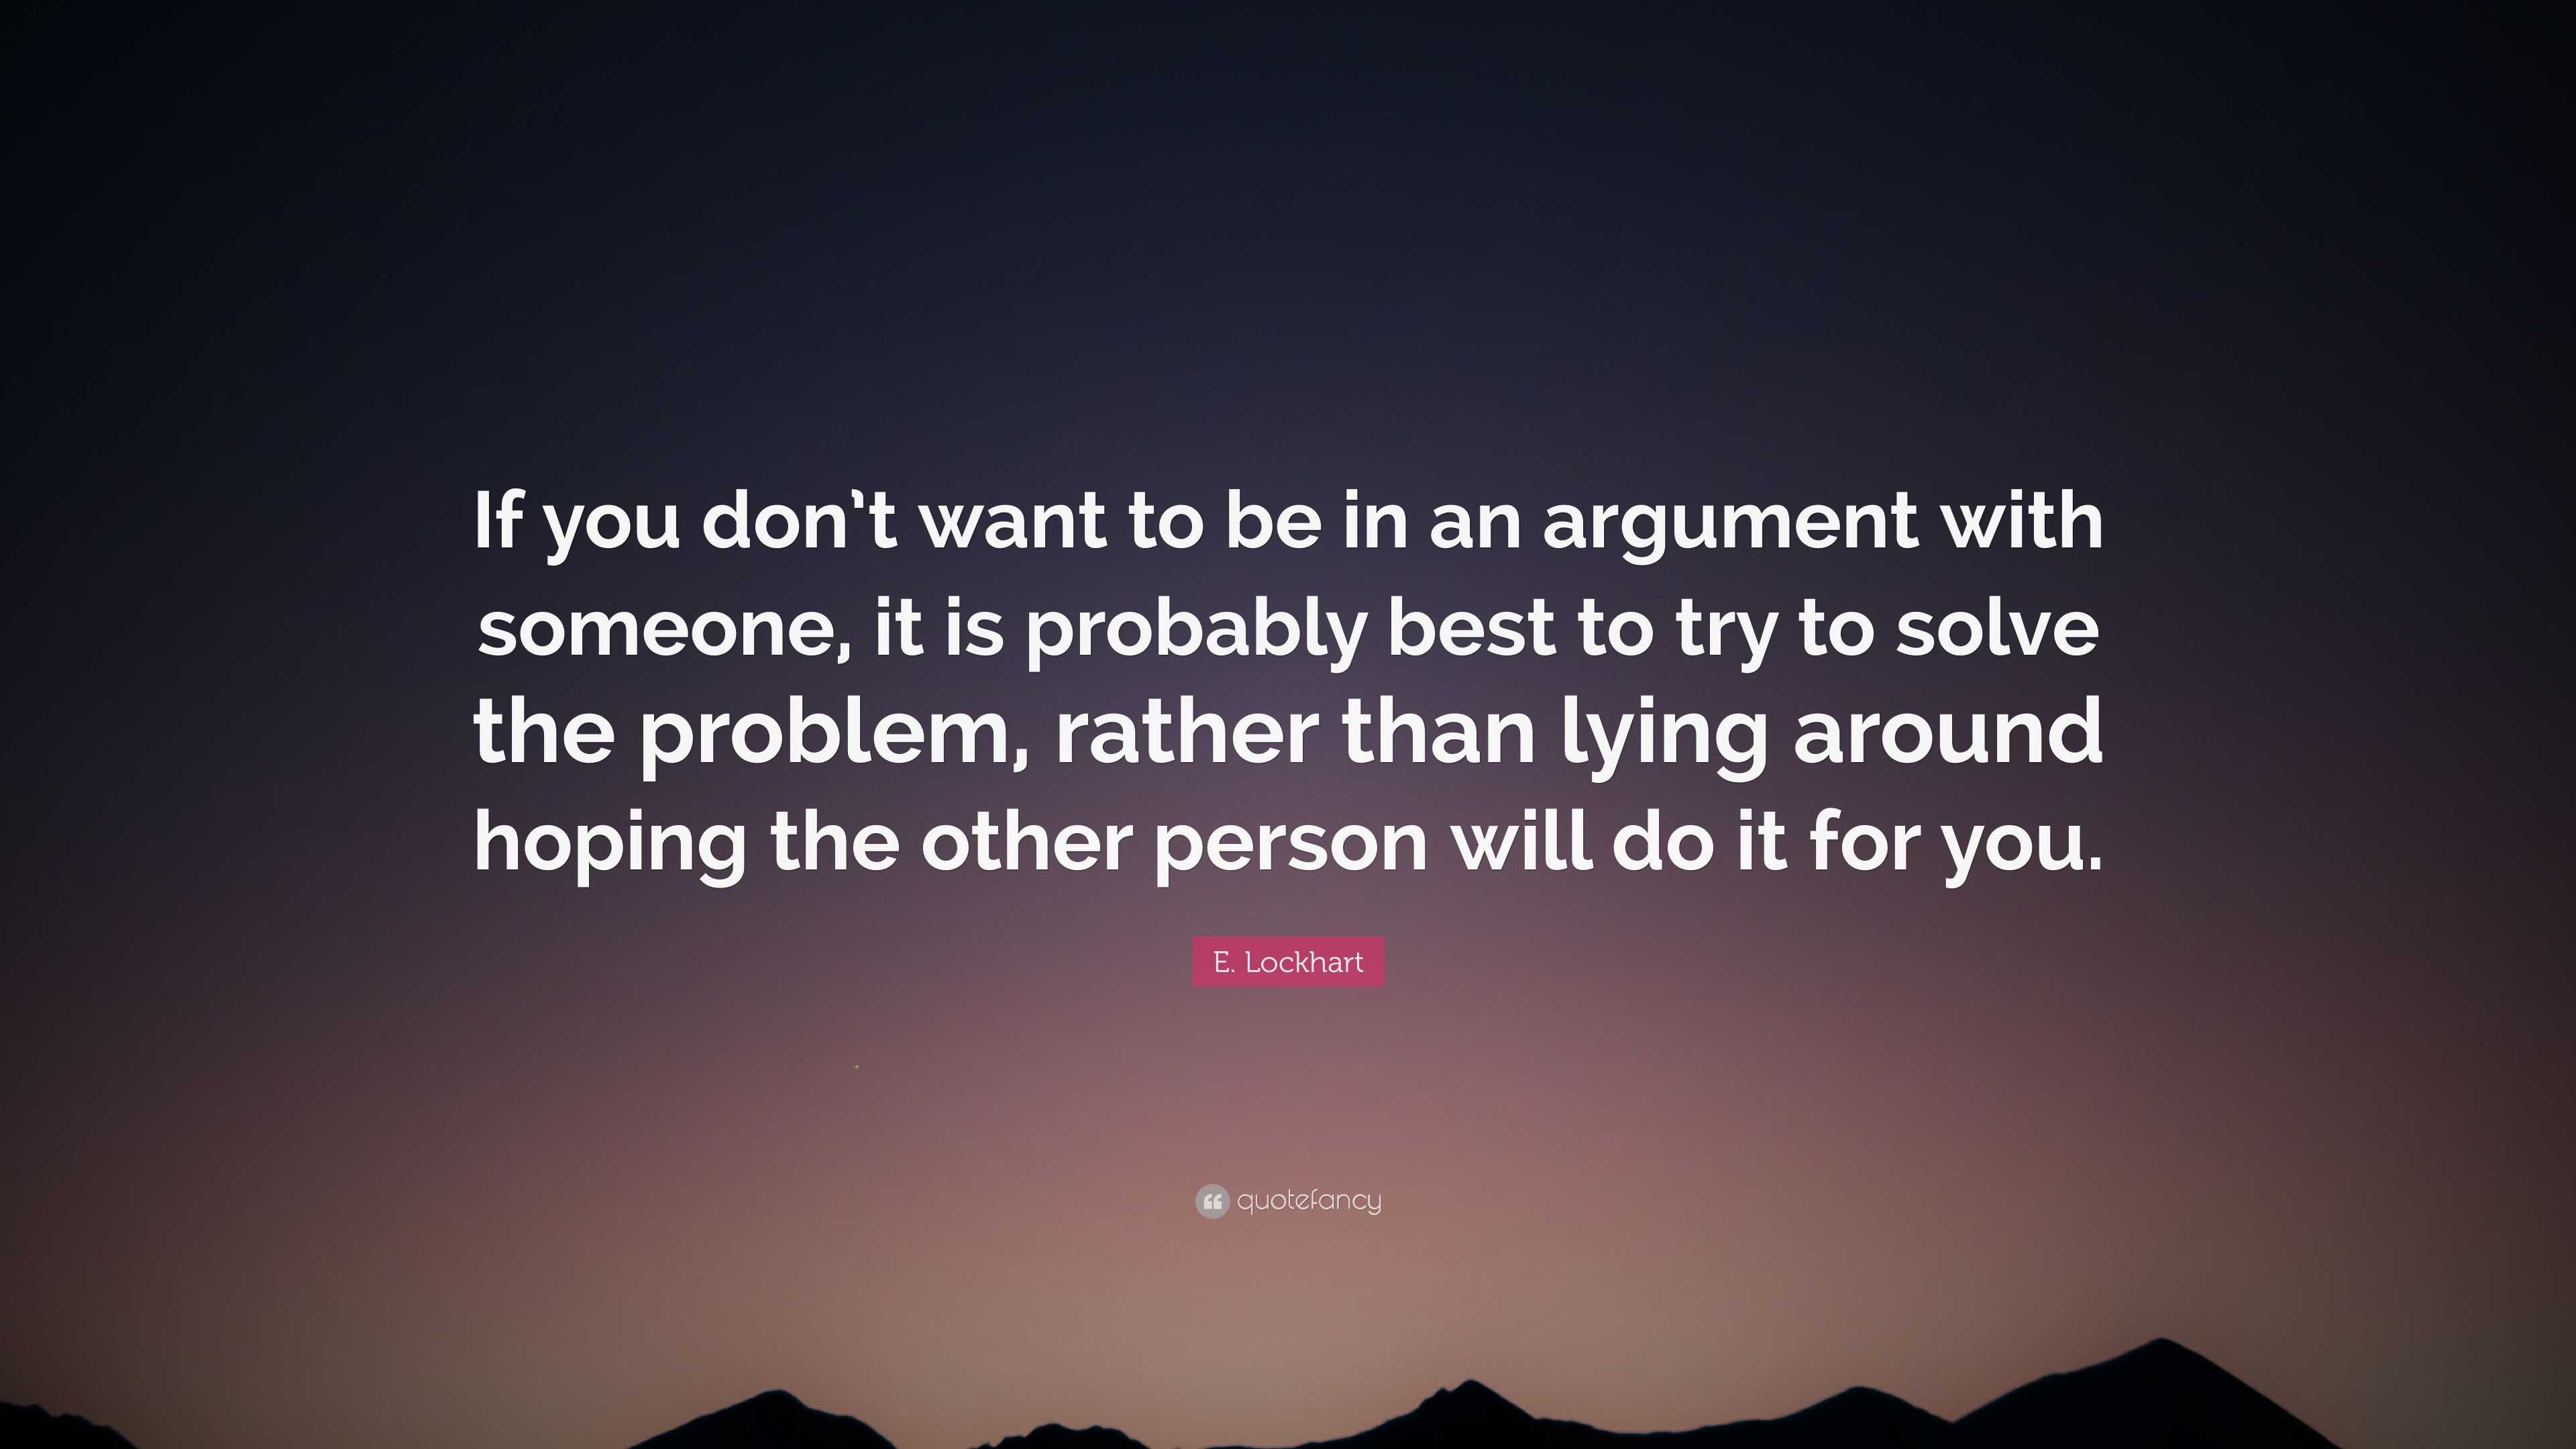 E Lockhart Quote If You Don T Want To Be In An Argument With Someone It Is Probably Best To Try To Solve The Problem Rather Than Lying